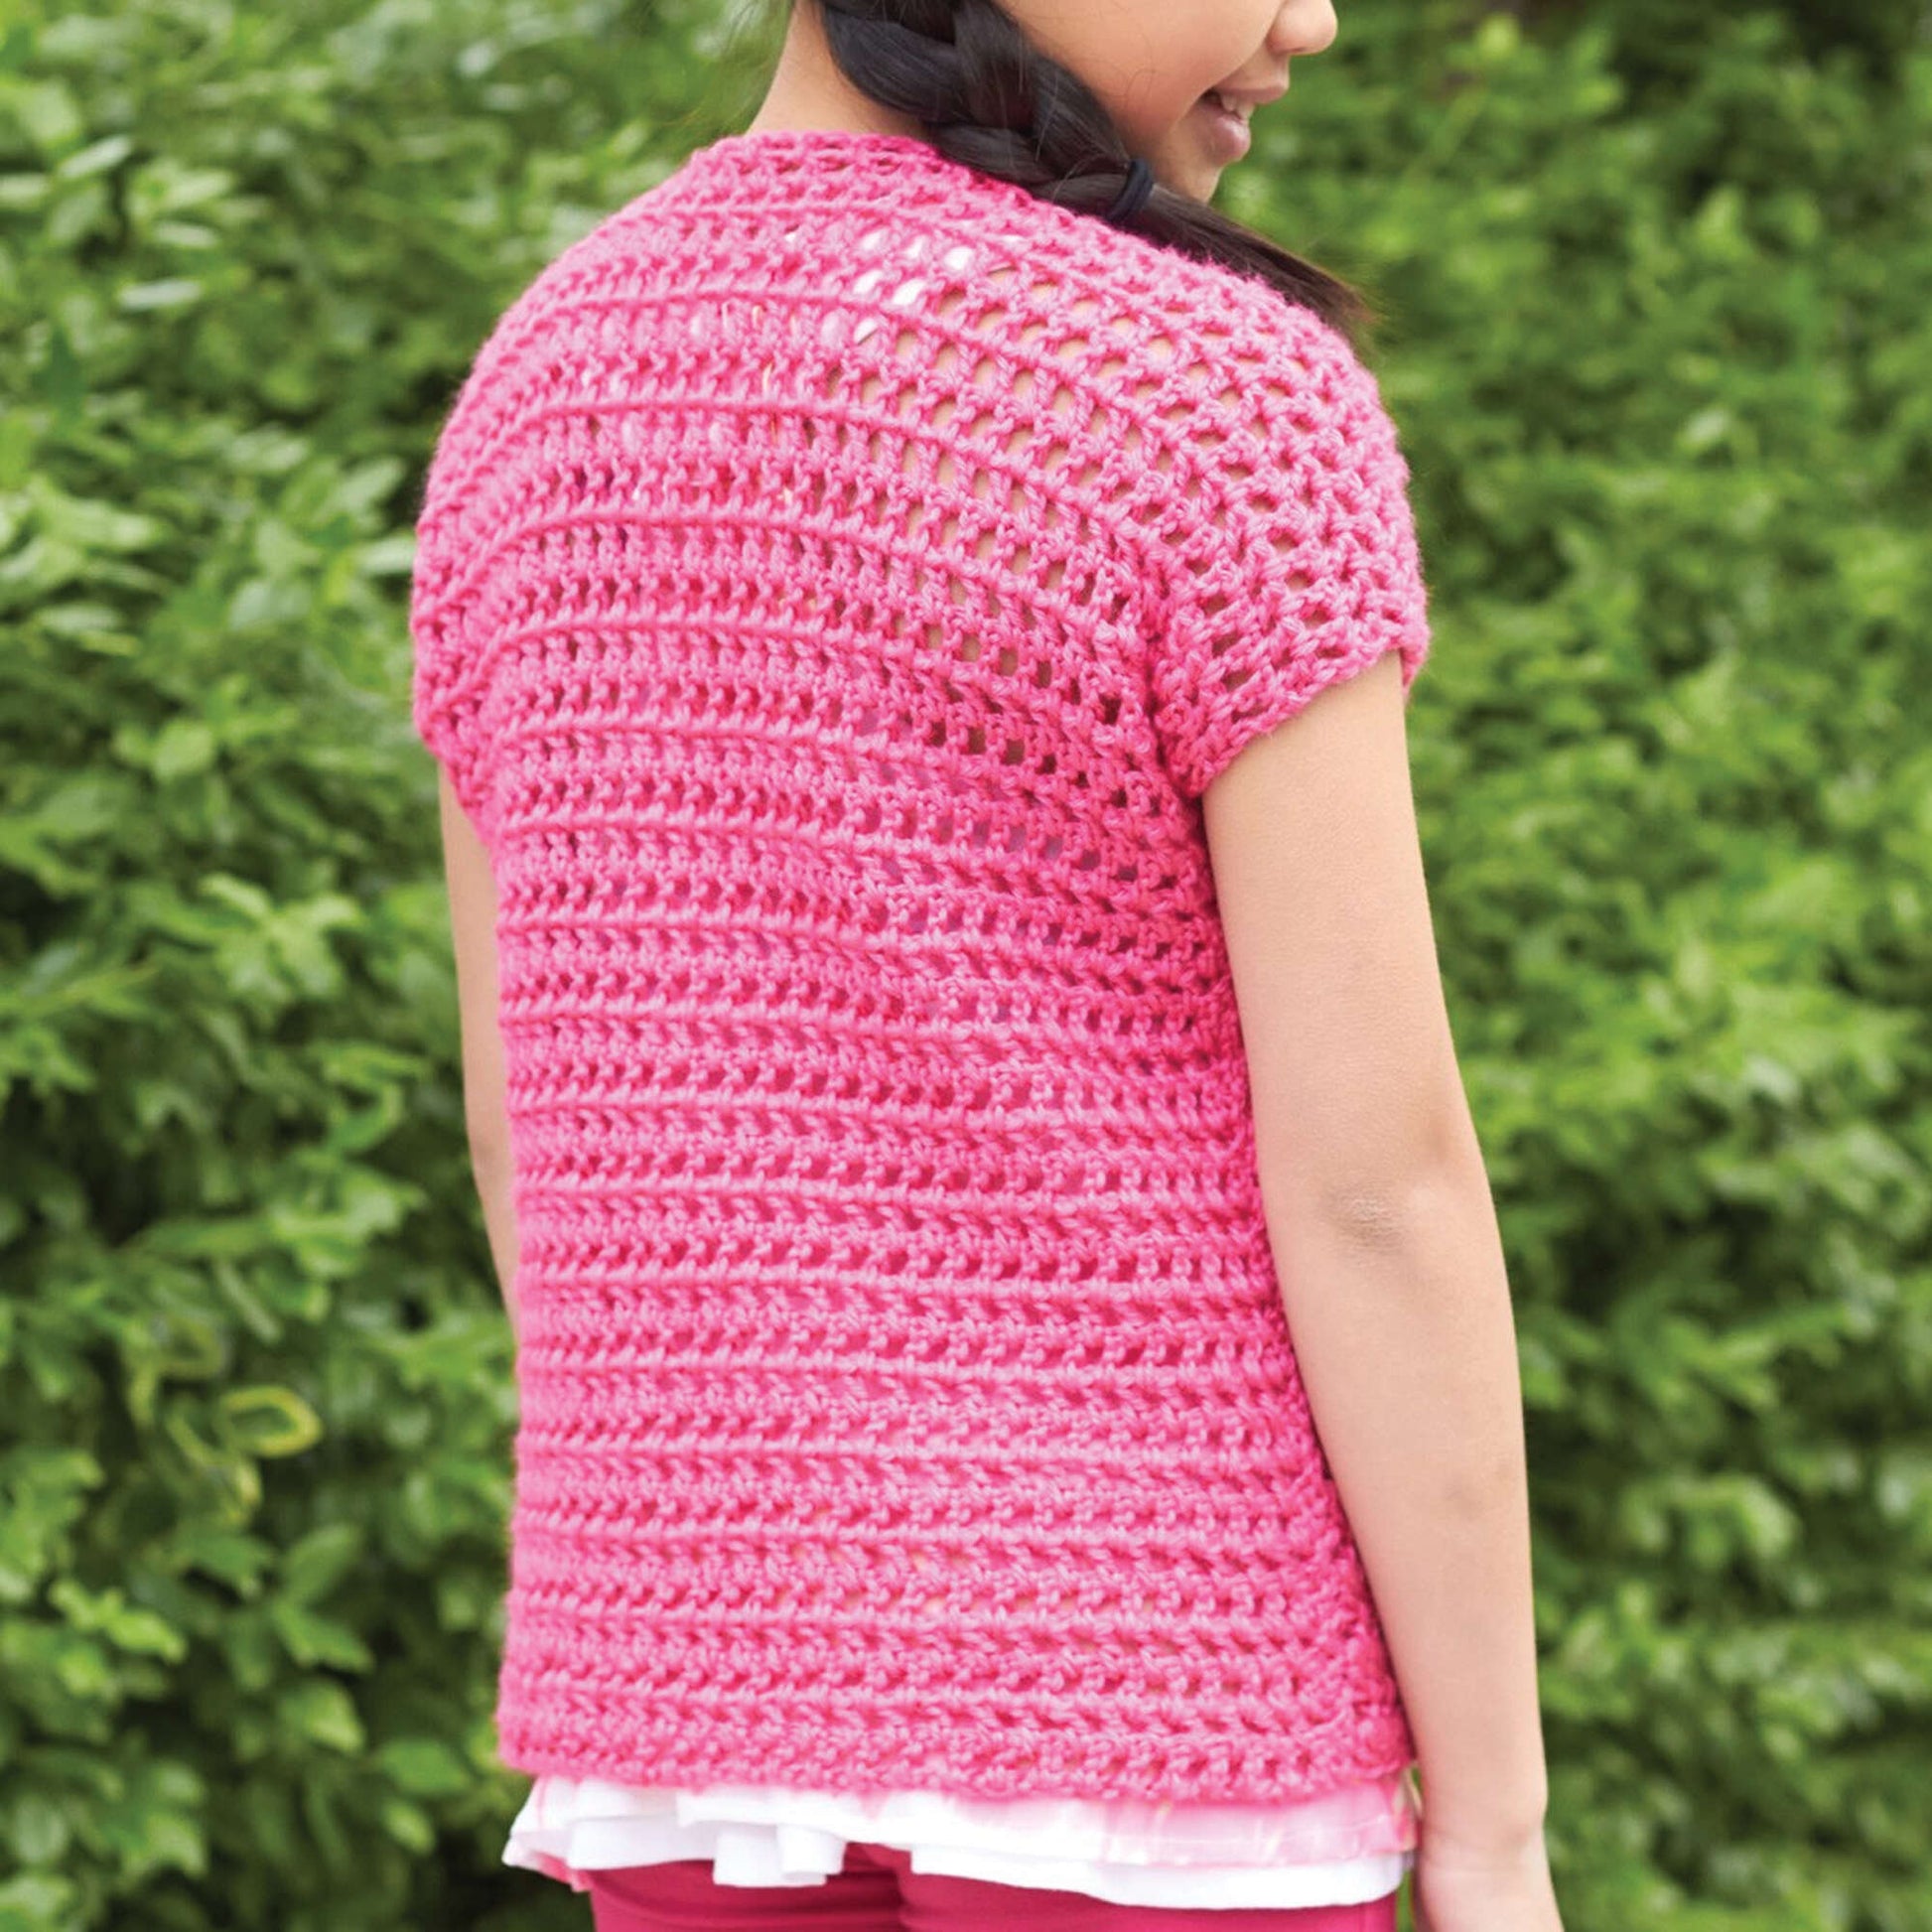 Free Caron Crochet School Photo Day Cover-Up Pattern